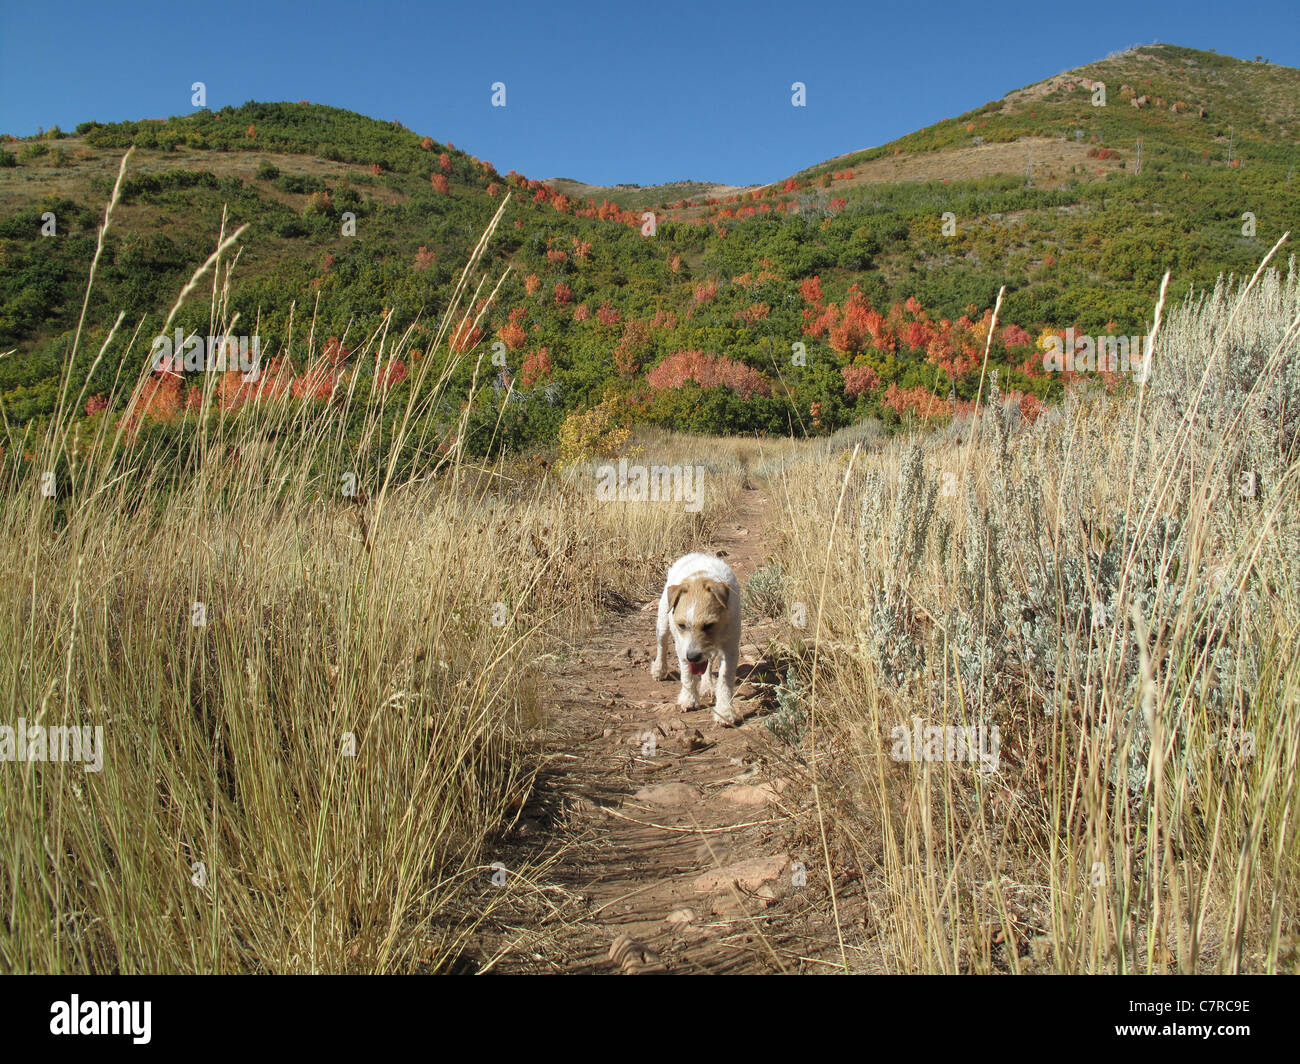 Dog on hiking trail through trees with colorful leaves at Killyon Canyon, Utah, United States Stock Photo